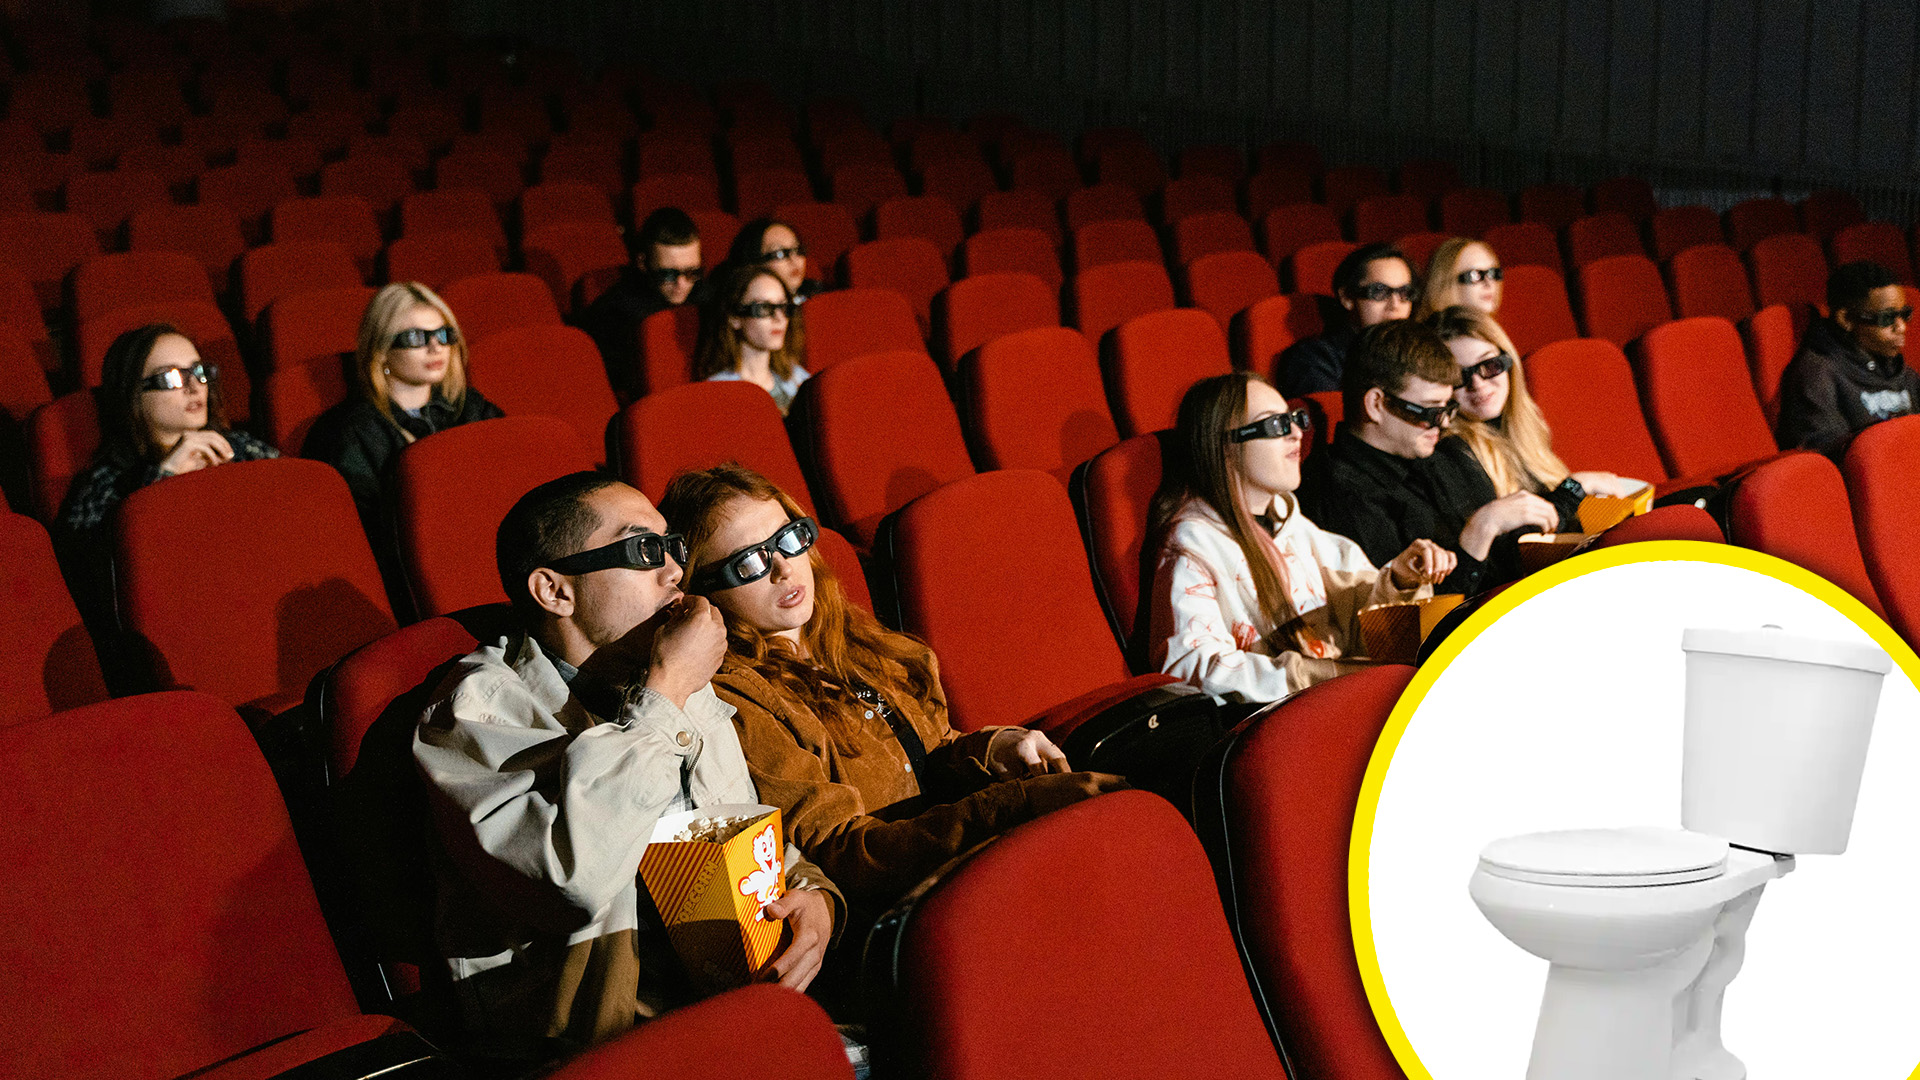 Cinema Seats Hold Significantly Germs Than Toilets, Study Finds